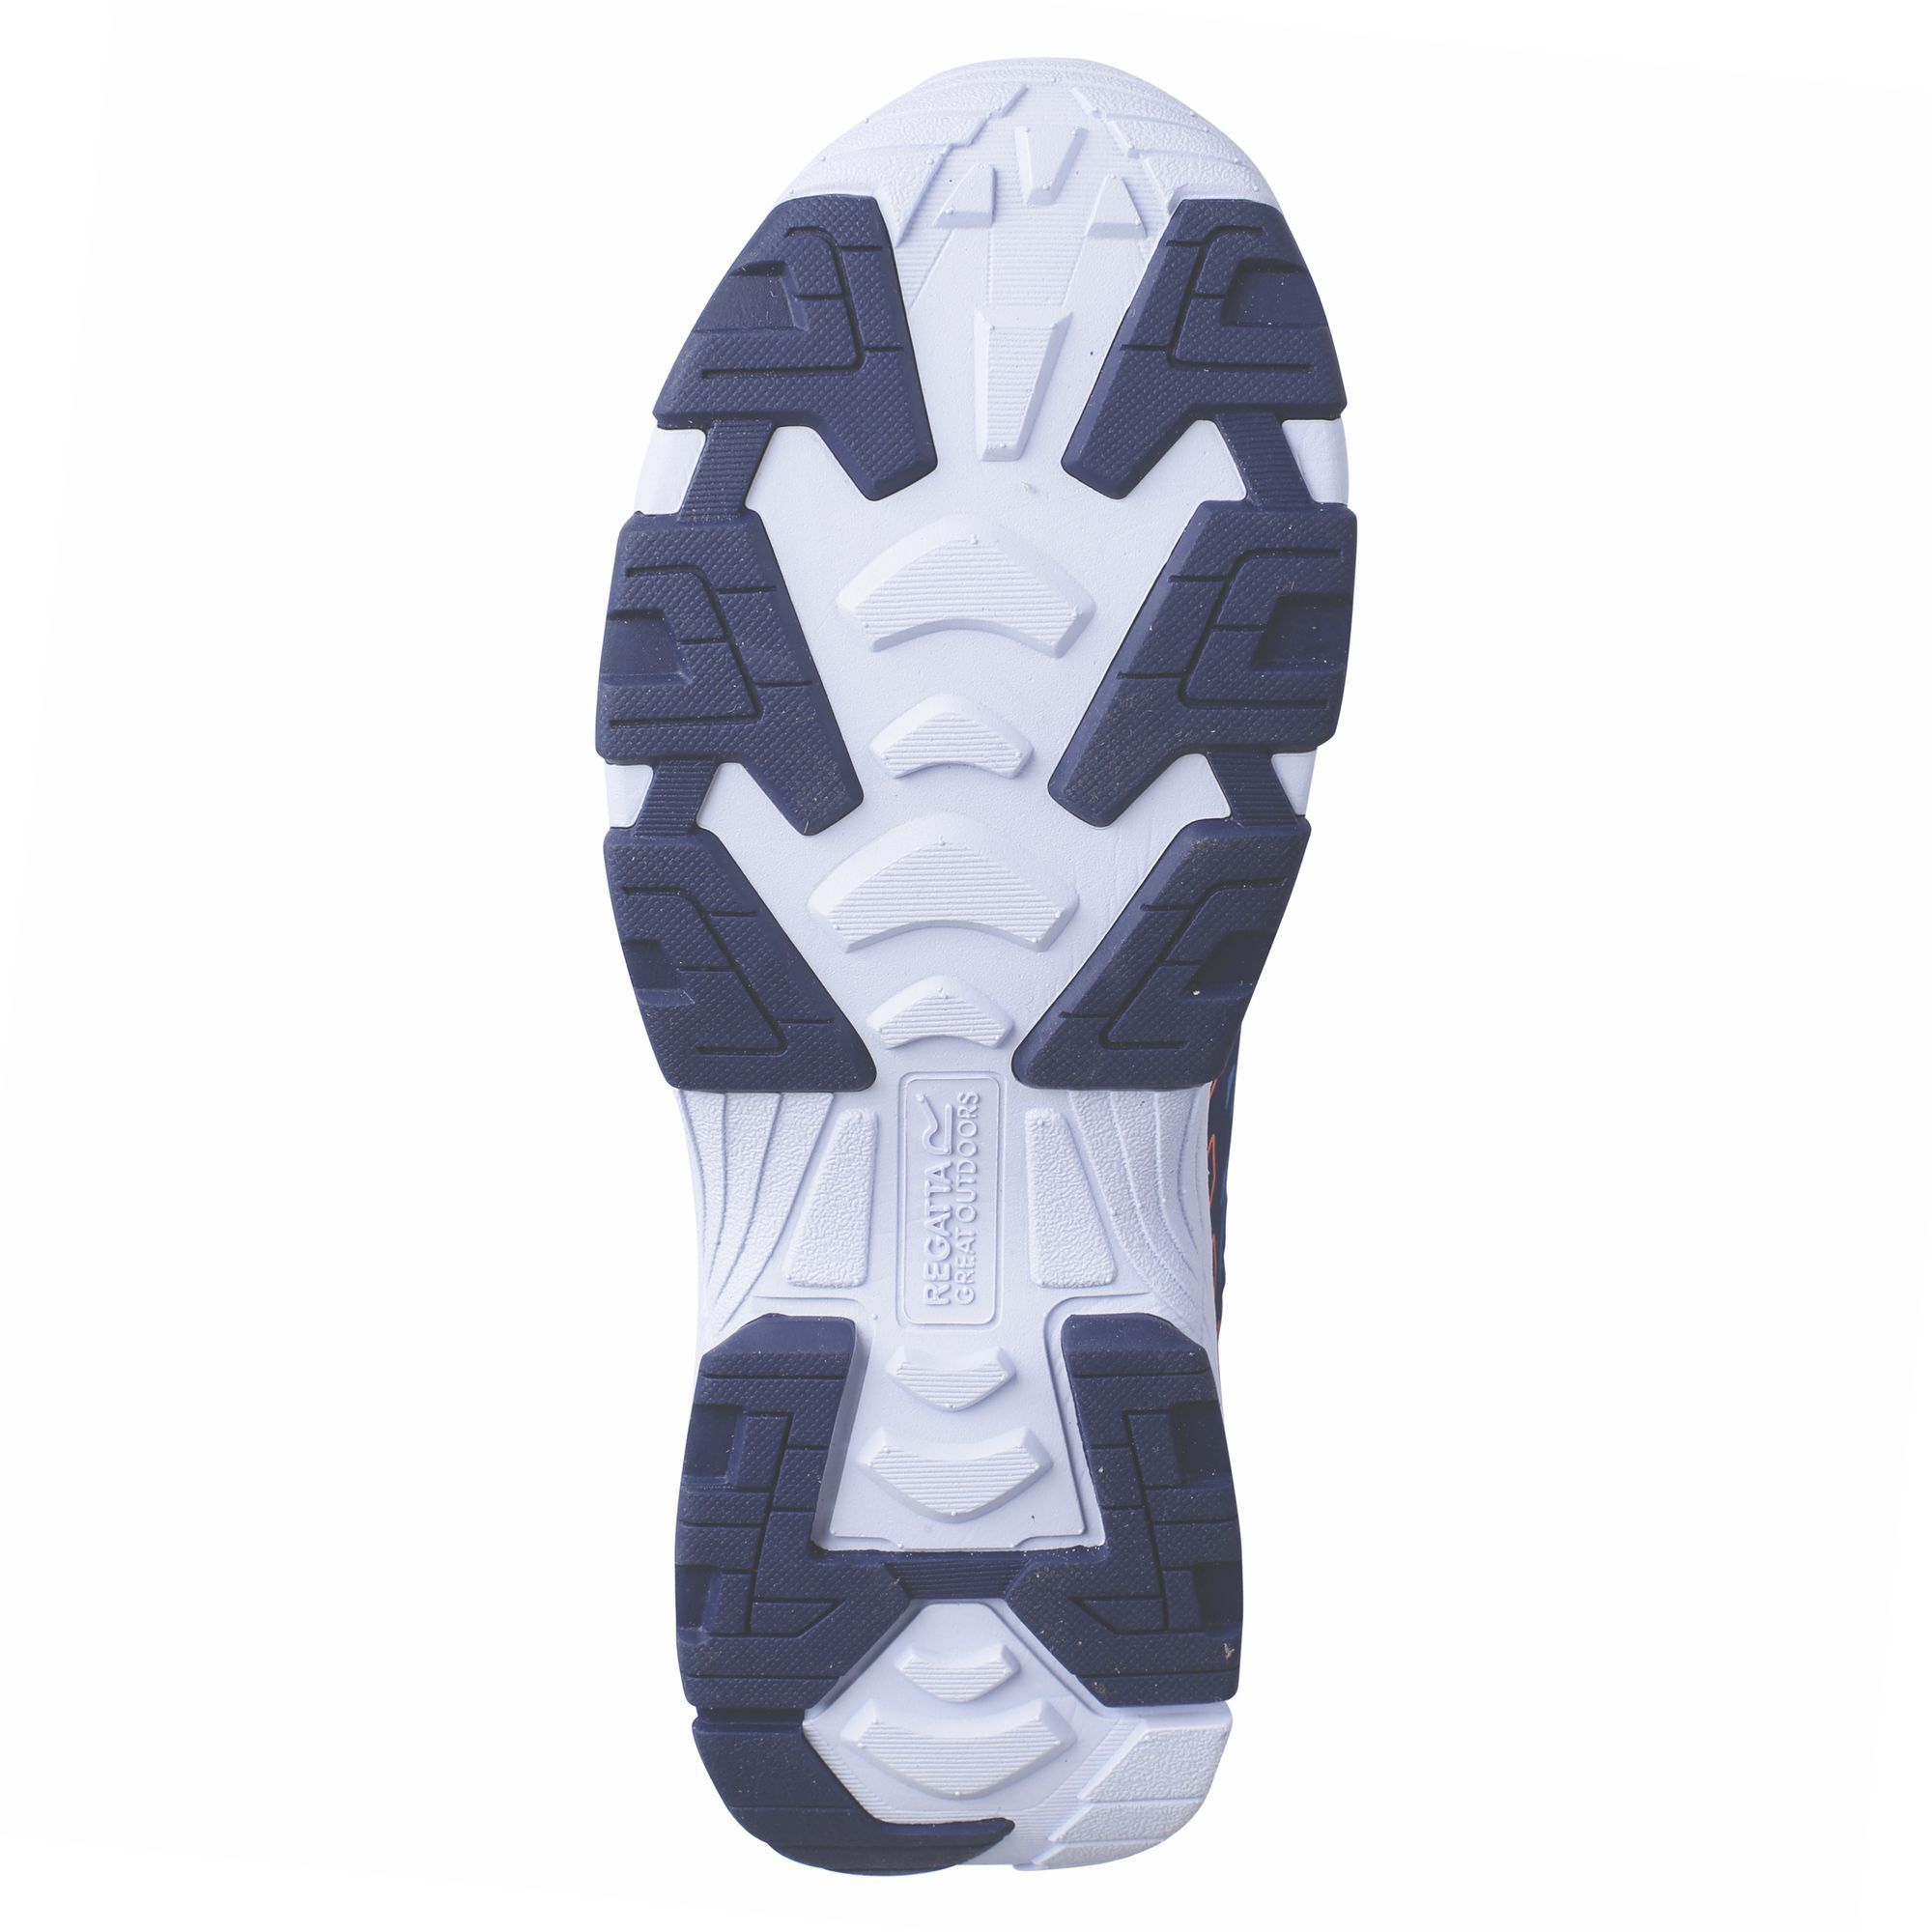 Thermo Plastic Polyurethane 10%, Polyurathane 40%, Polyester 50%. Lightweight mesh upper with PU overlays for a balance of breathability and support. EVA comfort footbed. EVA midsole with TPR pods for a balance of traction and underfoot comfort.